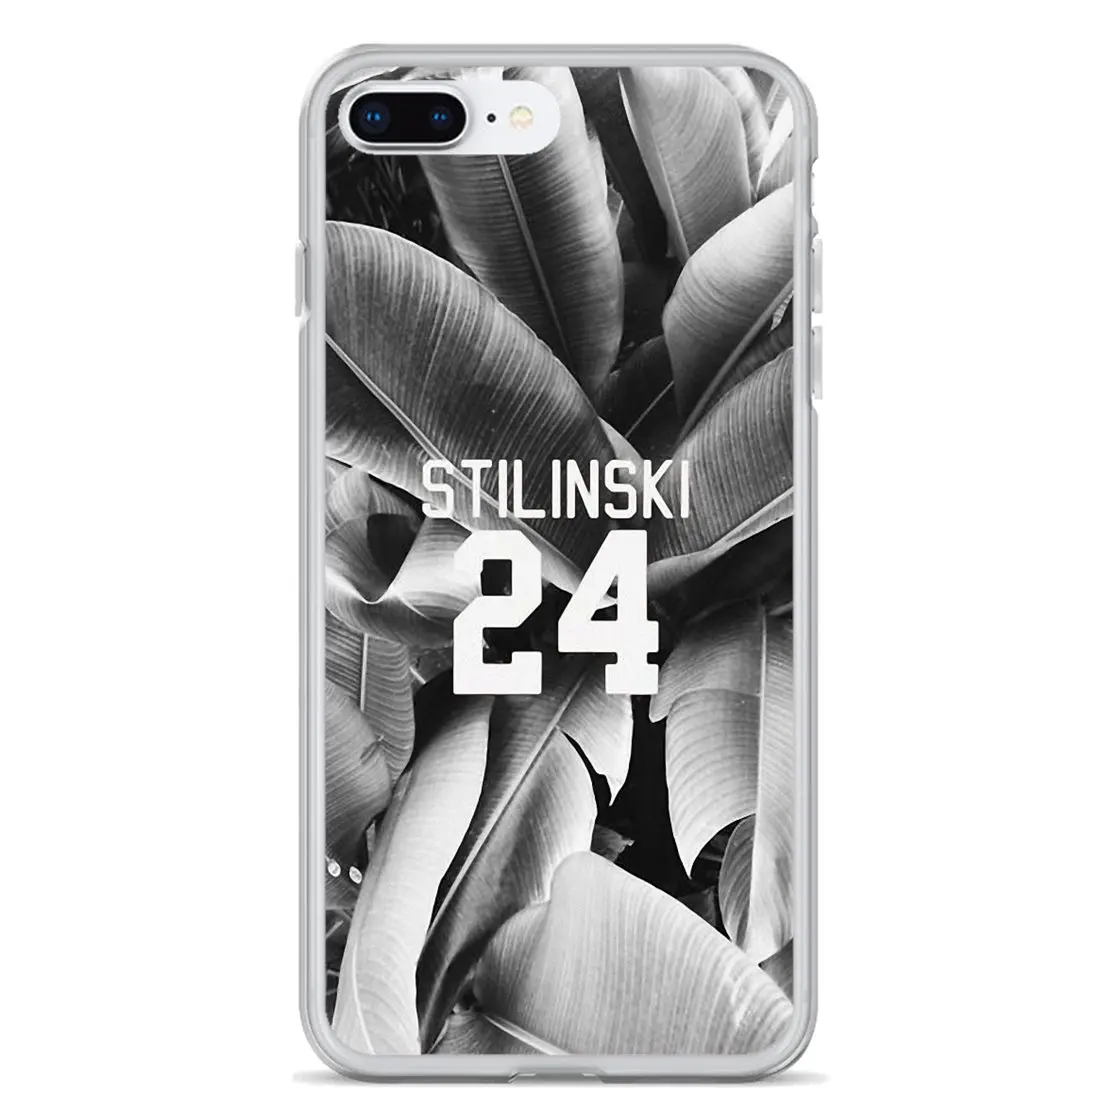 Soft Transparent Shell Covers Teen Wolf Stilinski 24 Luxury For Meizu M2 M3 M5 M6 NOTE M6t MX6 M3S M5S M6S Pro 5 6 Plus U20 best meizu phone case Cases For Meizu